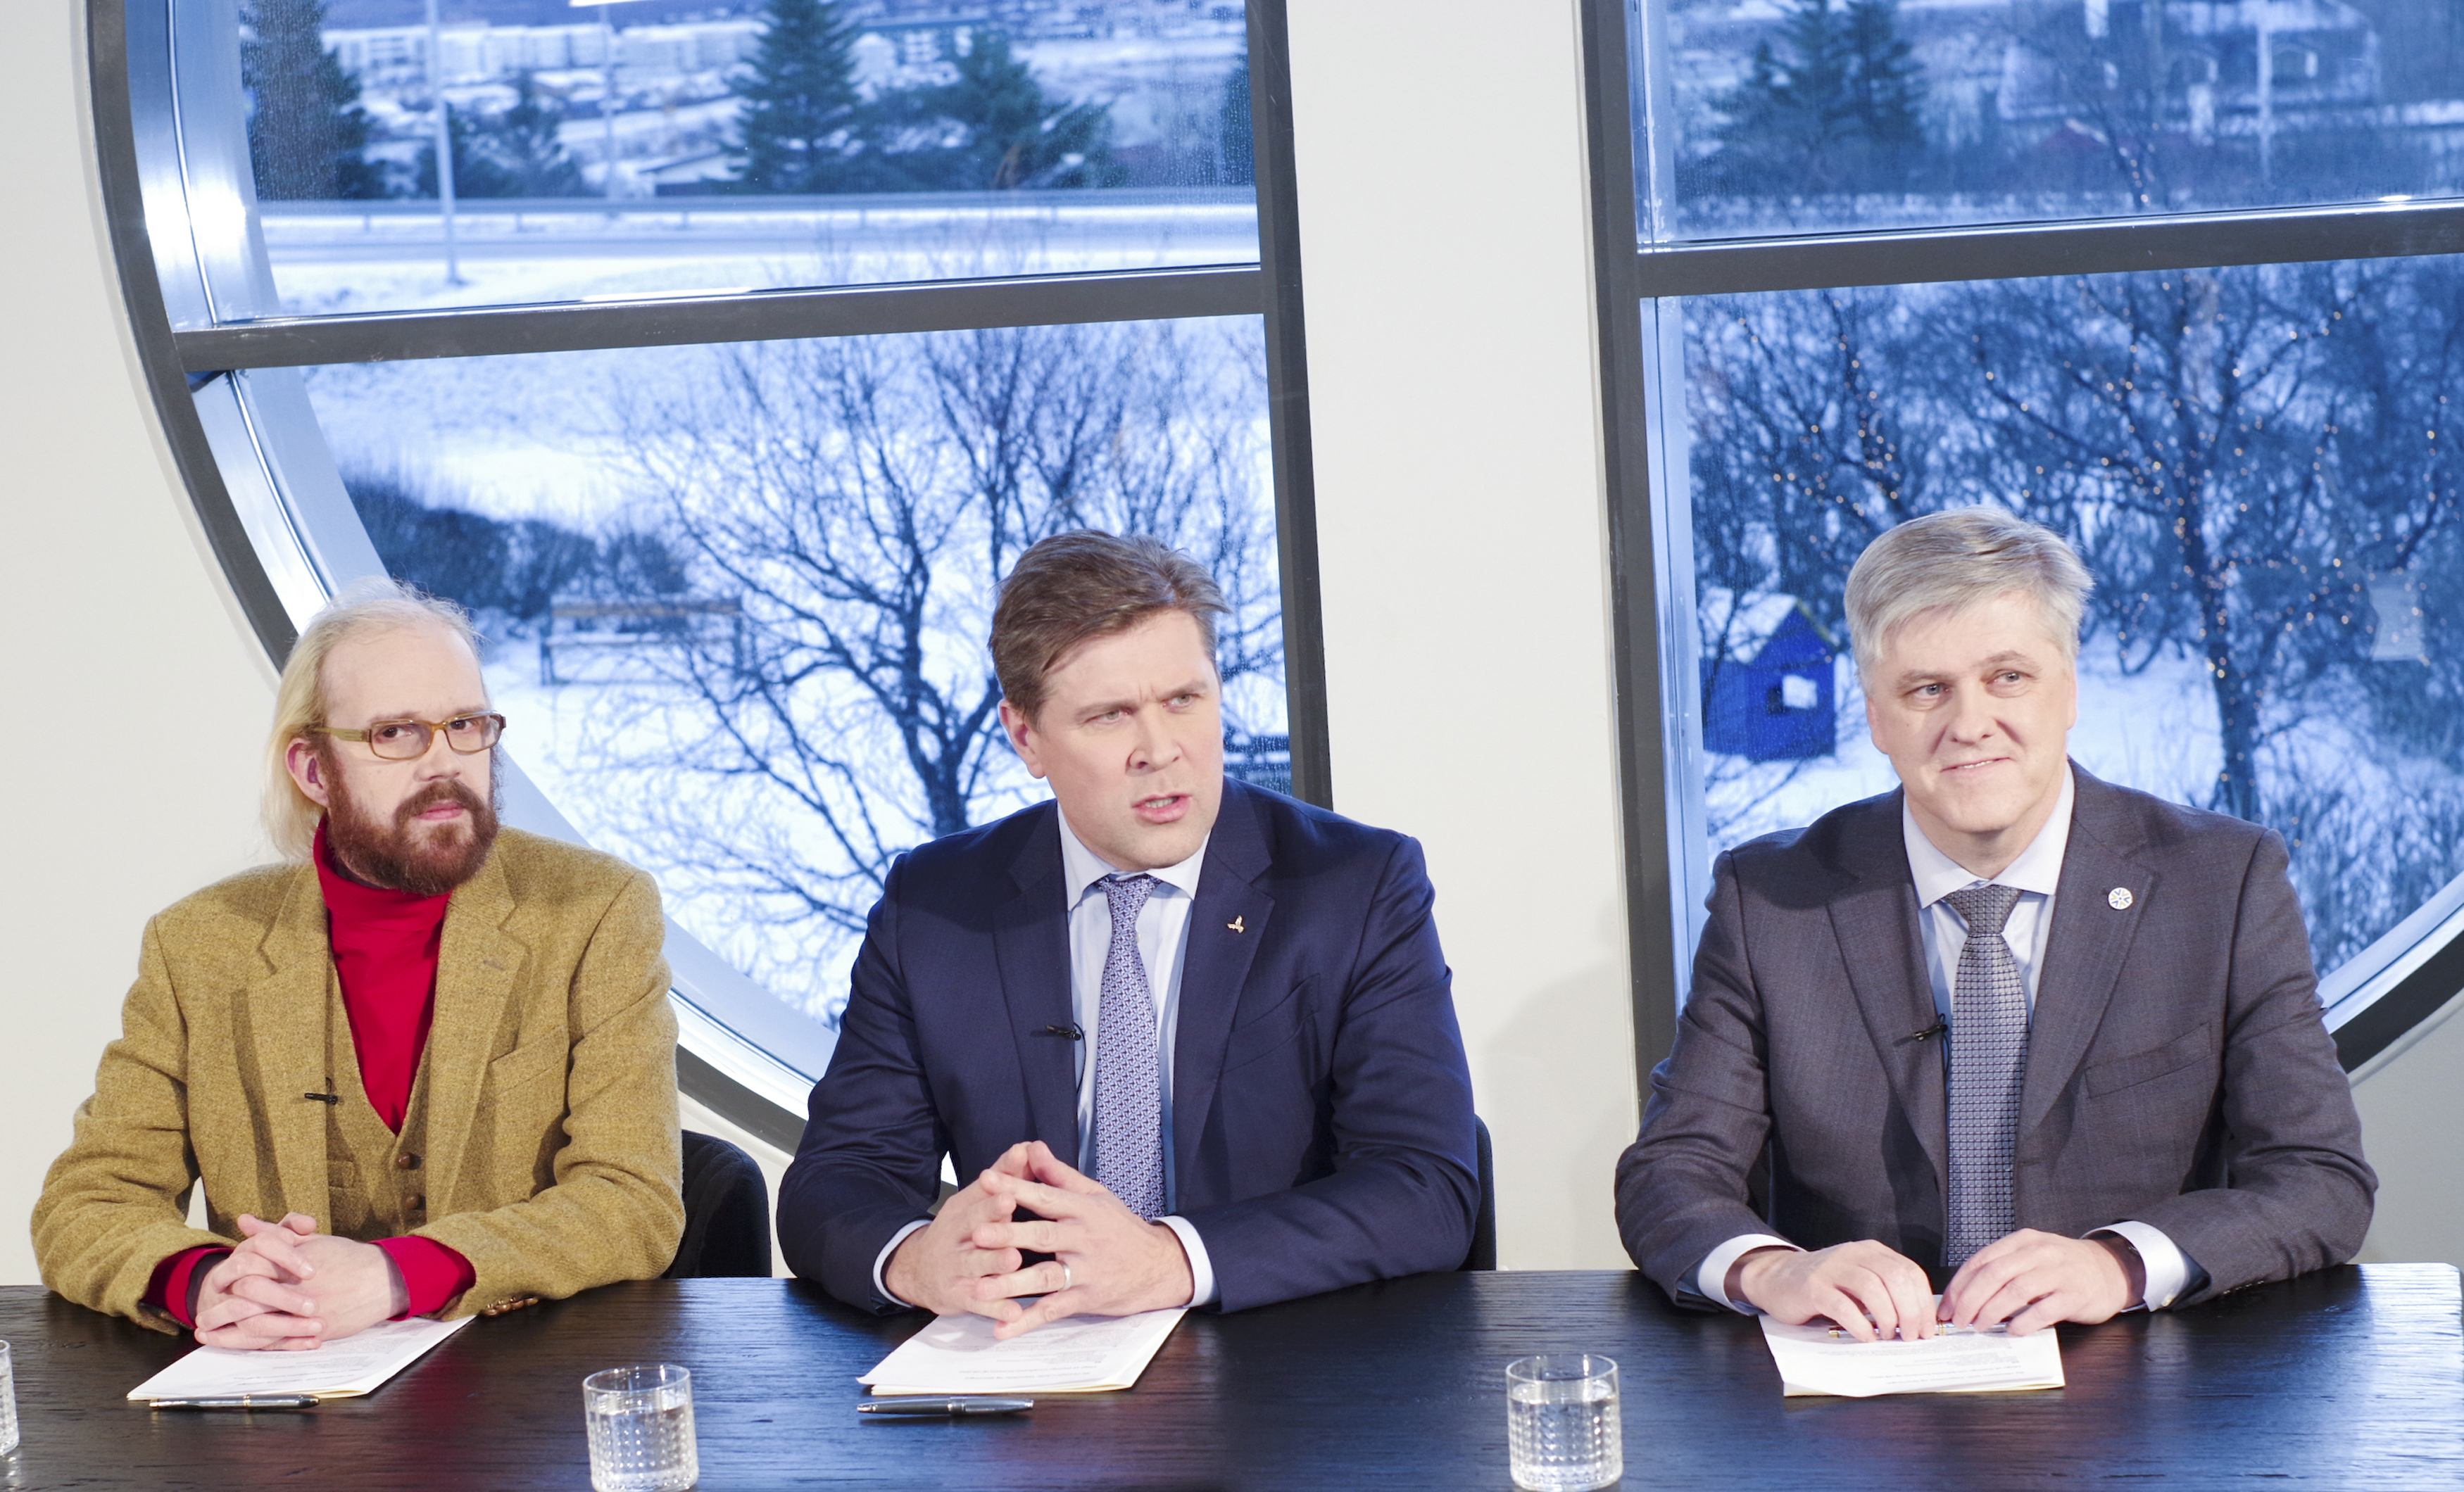 Bjarni Benediktsson the leader of the Icelandic Independence Party, a member of the parliament Ottarr Proppe and politican Benedikt Johannesson introducing the new Icelandic government agreement during a press conference in Kopavogur, Iceland, January 10, 2017. REUTERS/Geirix